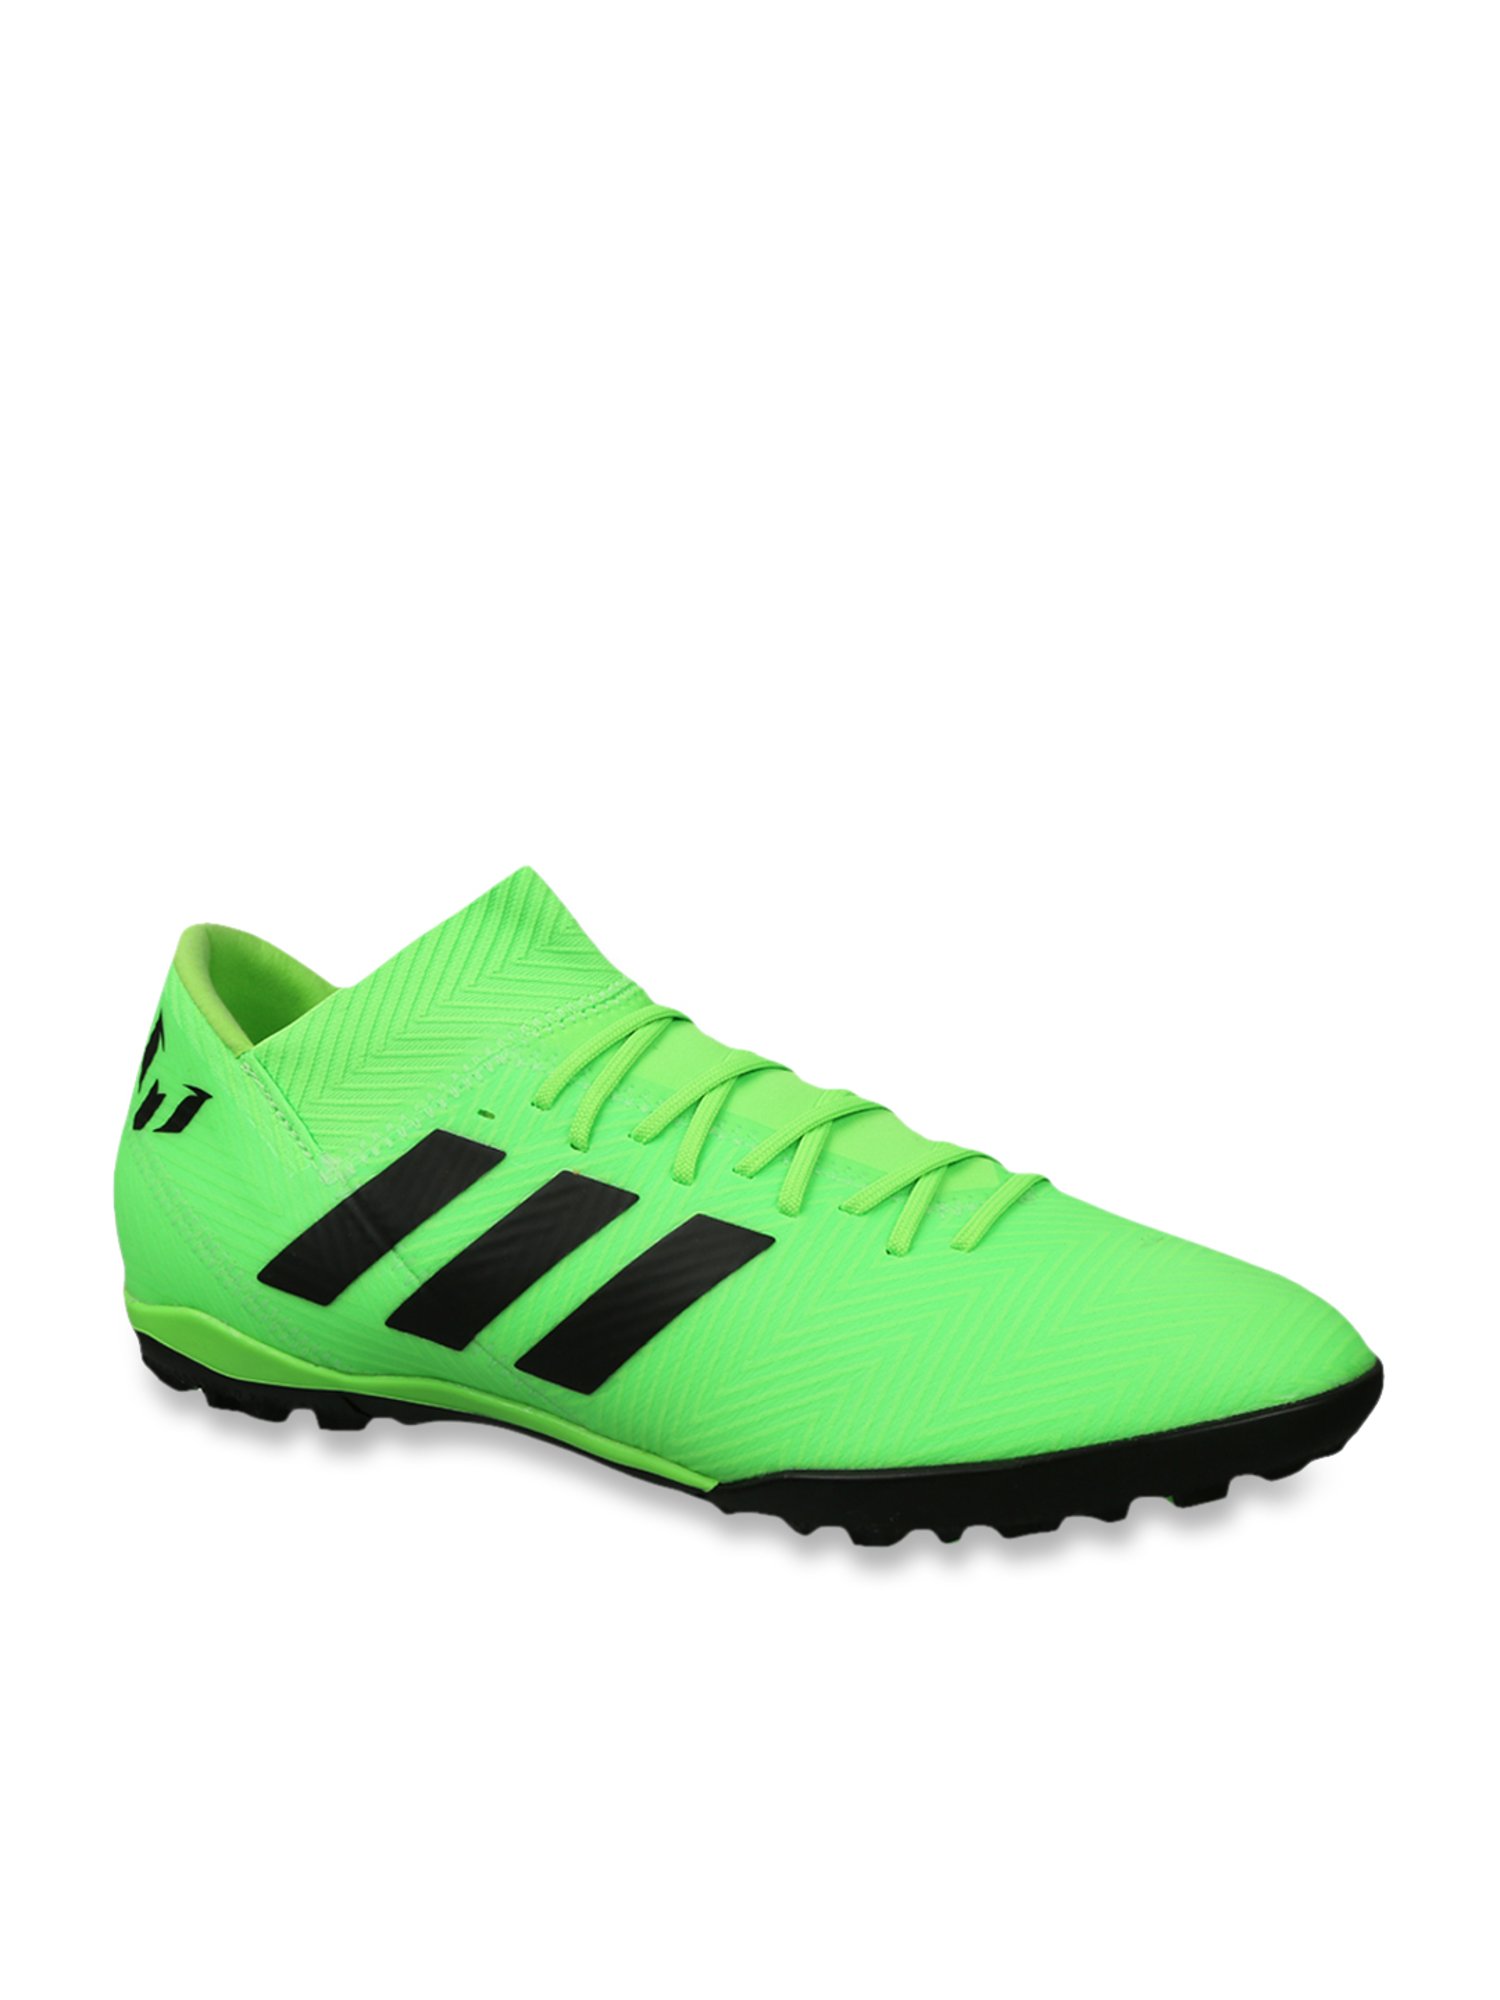 Buy Adidas Messi Tango 18.3 TF Green Football Shoes for Men at Best Price @ Tata CLiQ